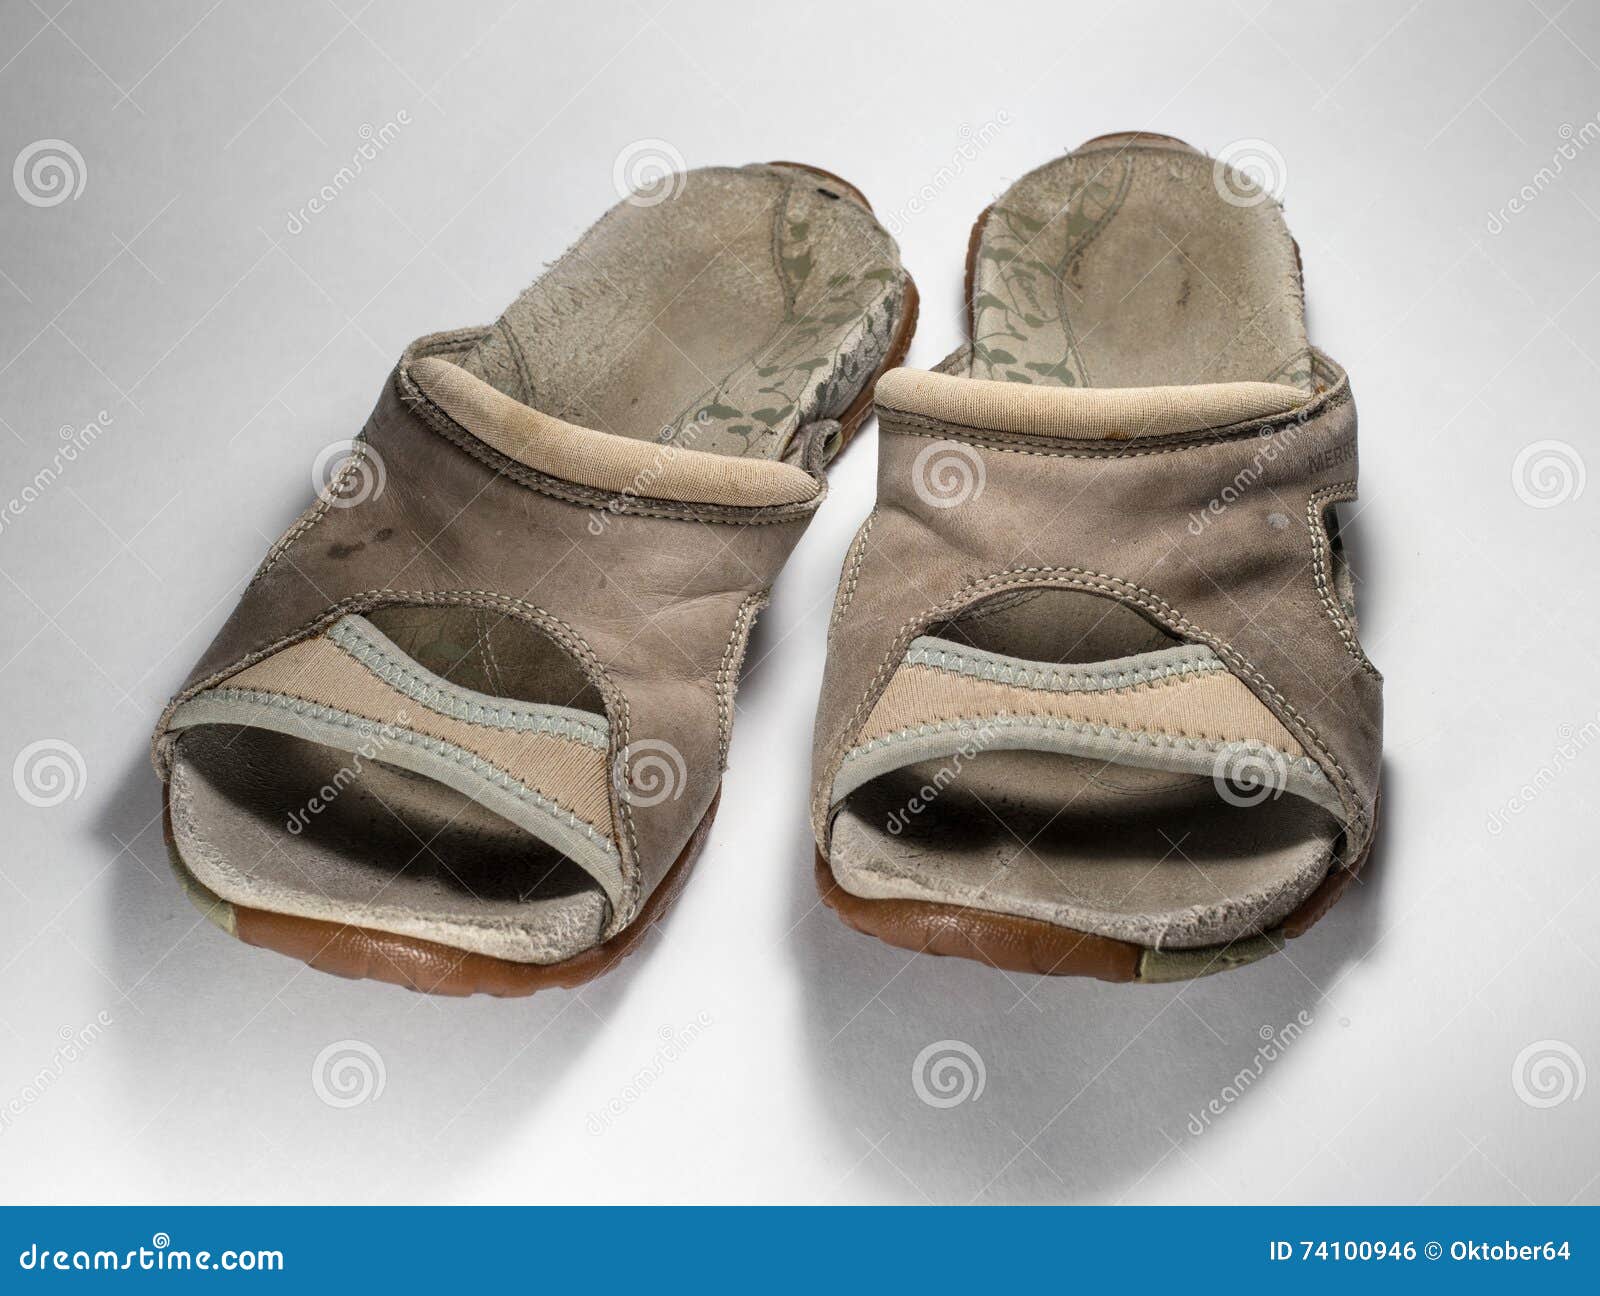 Old Dirty Shoes. Favorite Female Sandals. Stock Photo - Image of human ...